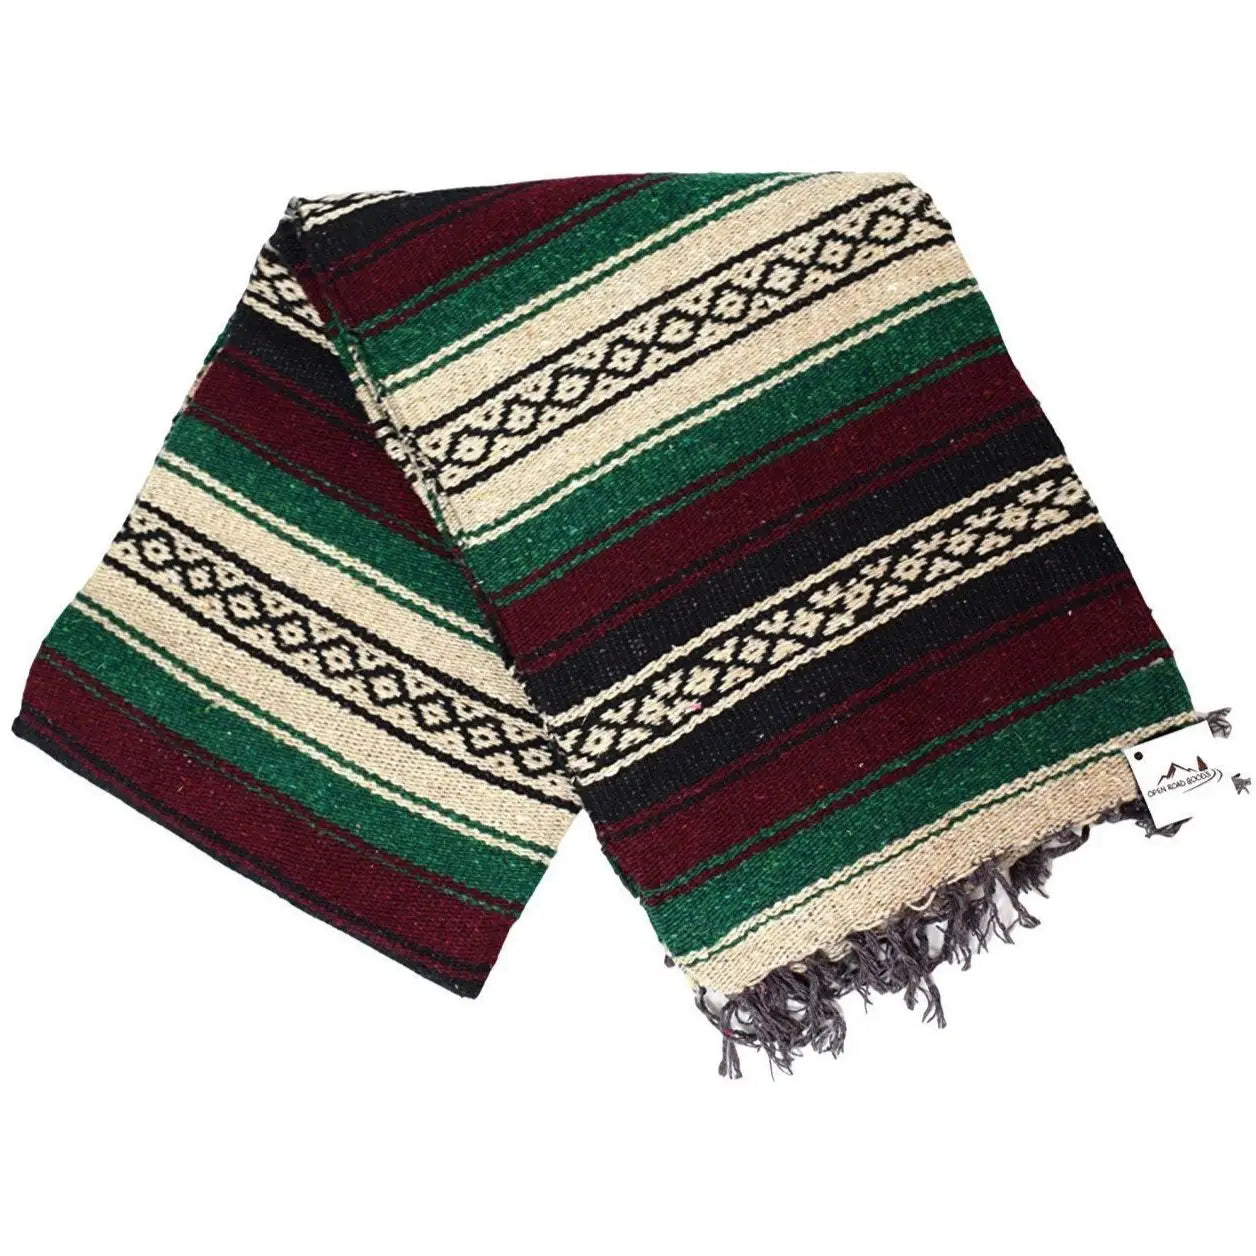 Vintage Style Mexican Blanket